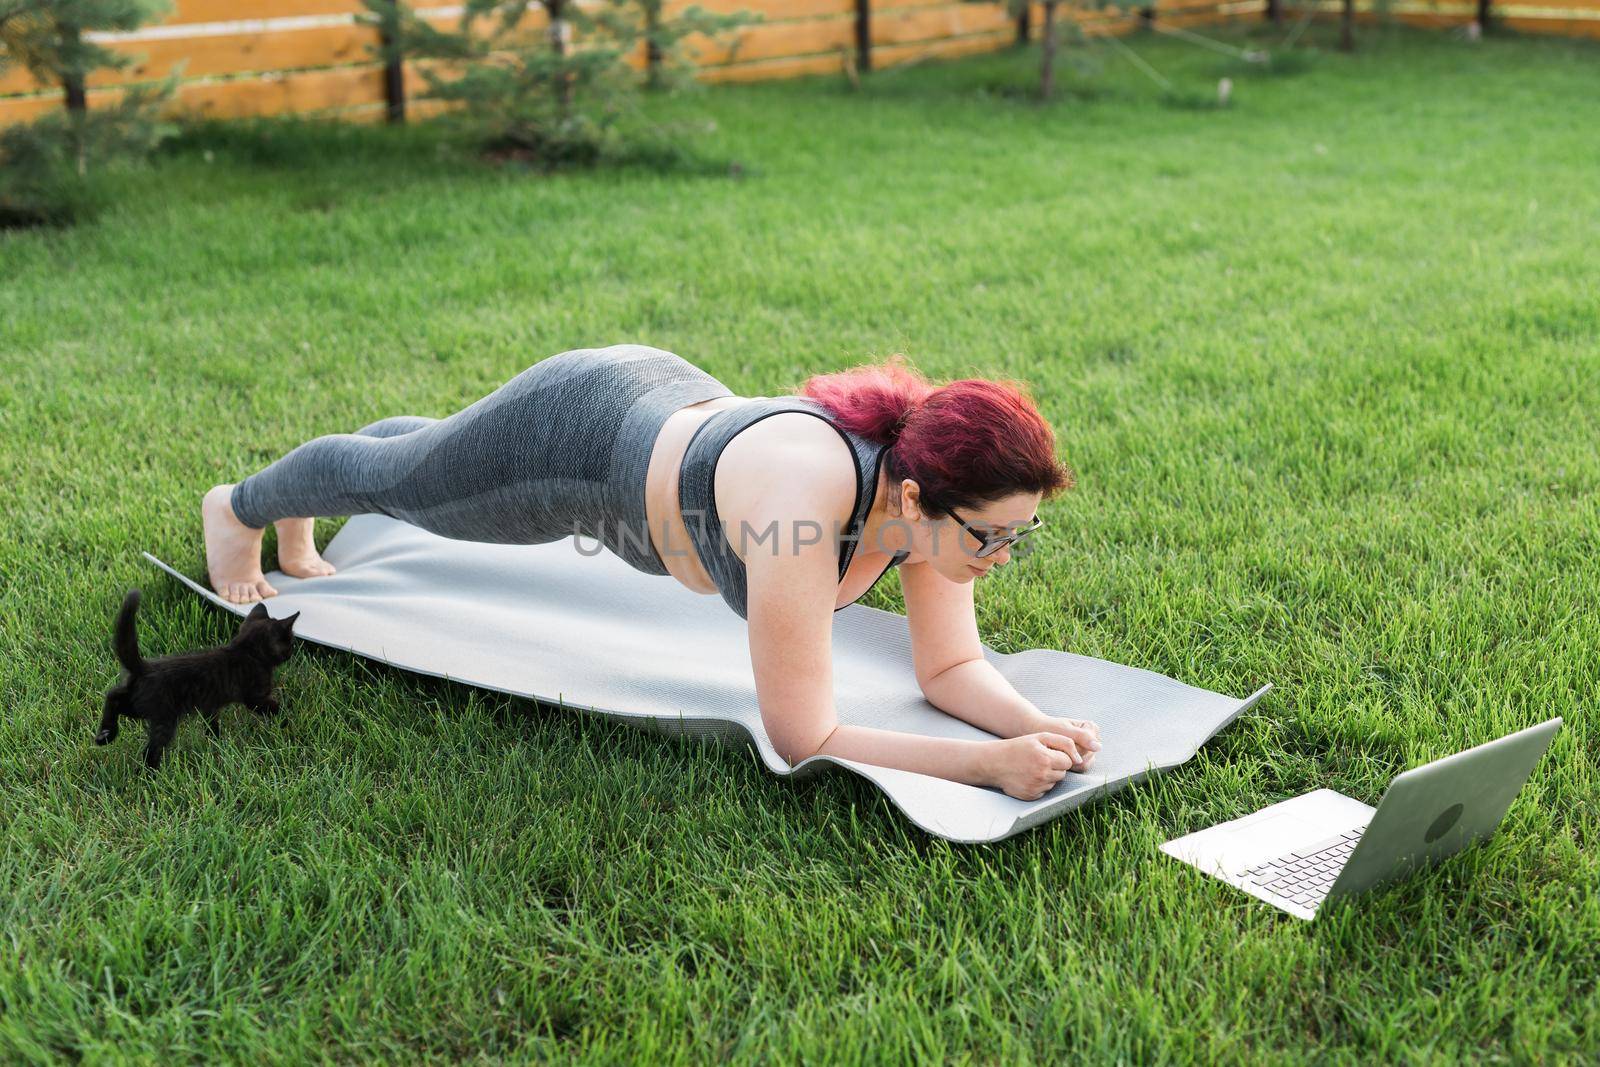 Young plus size woman in sporty top and leggings standing in plank on yoga mat spending time on green grass in yard. Black kitten walks around her. Well being fitness concept